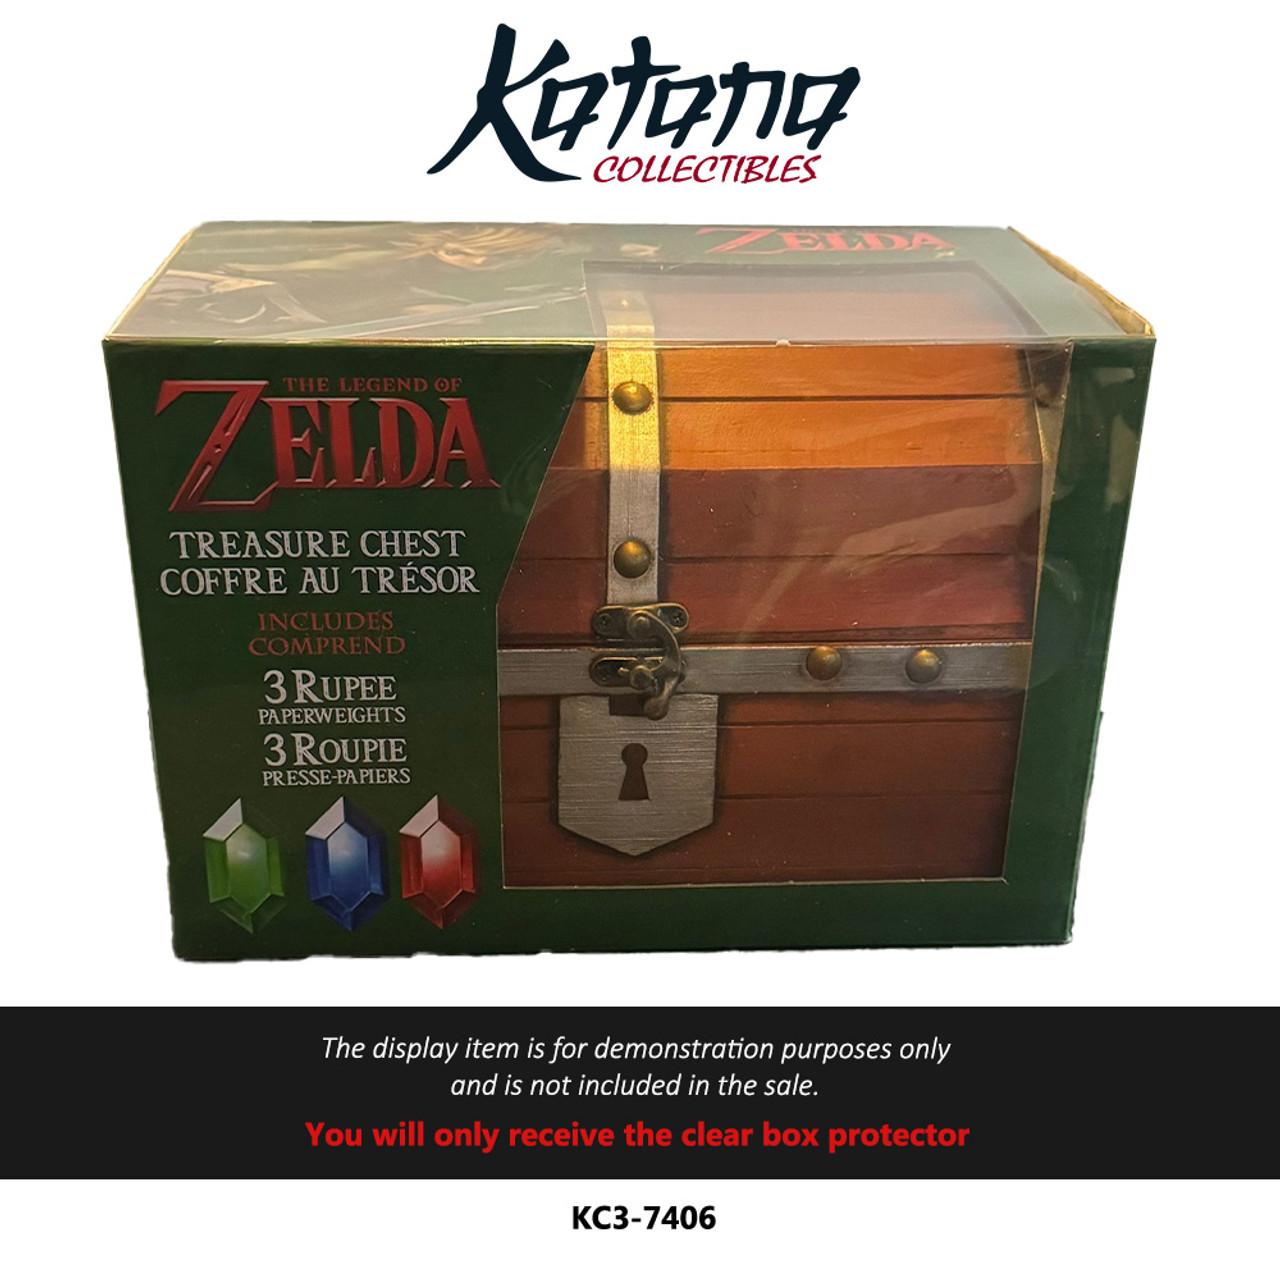 Katana Collectibles Protector For Pyramid America Nintendo Legend Of Zelda 3 Rupee Paper Weights Treasure Chest